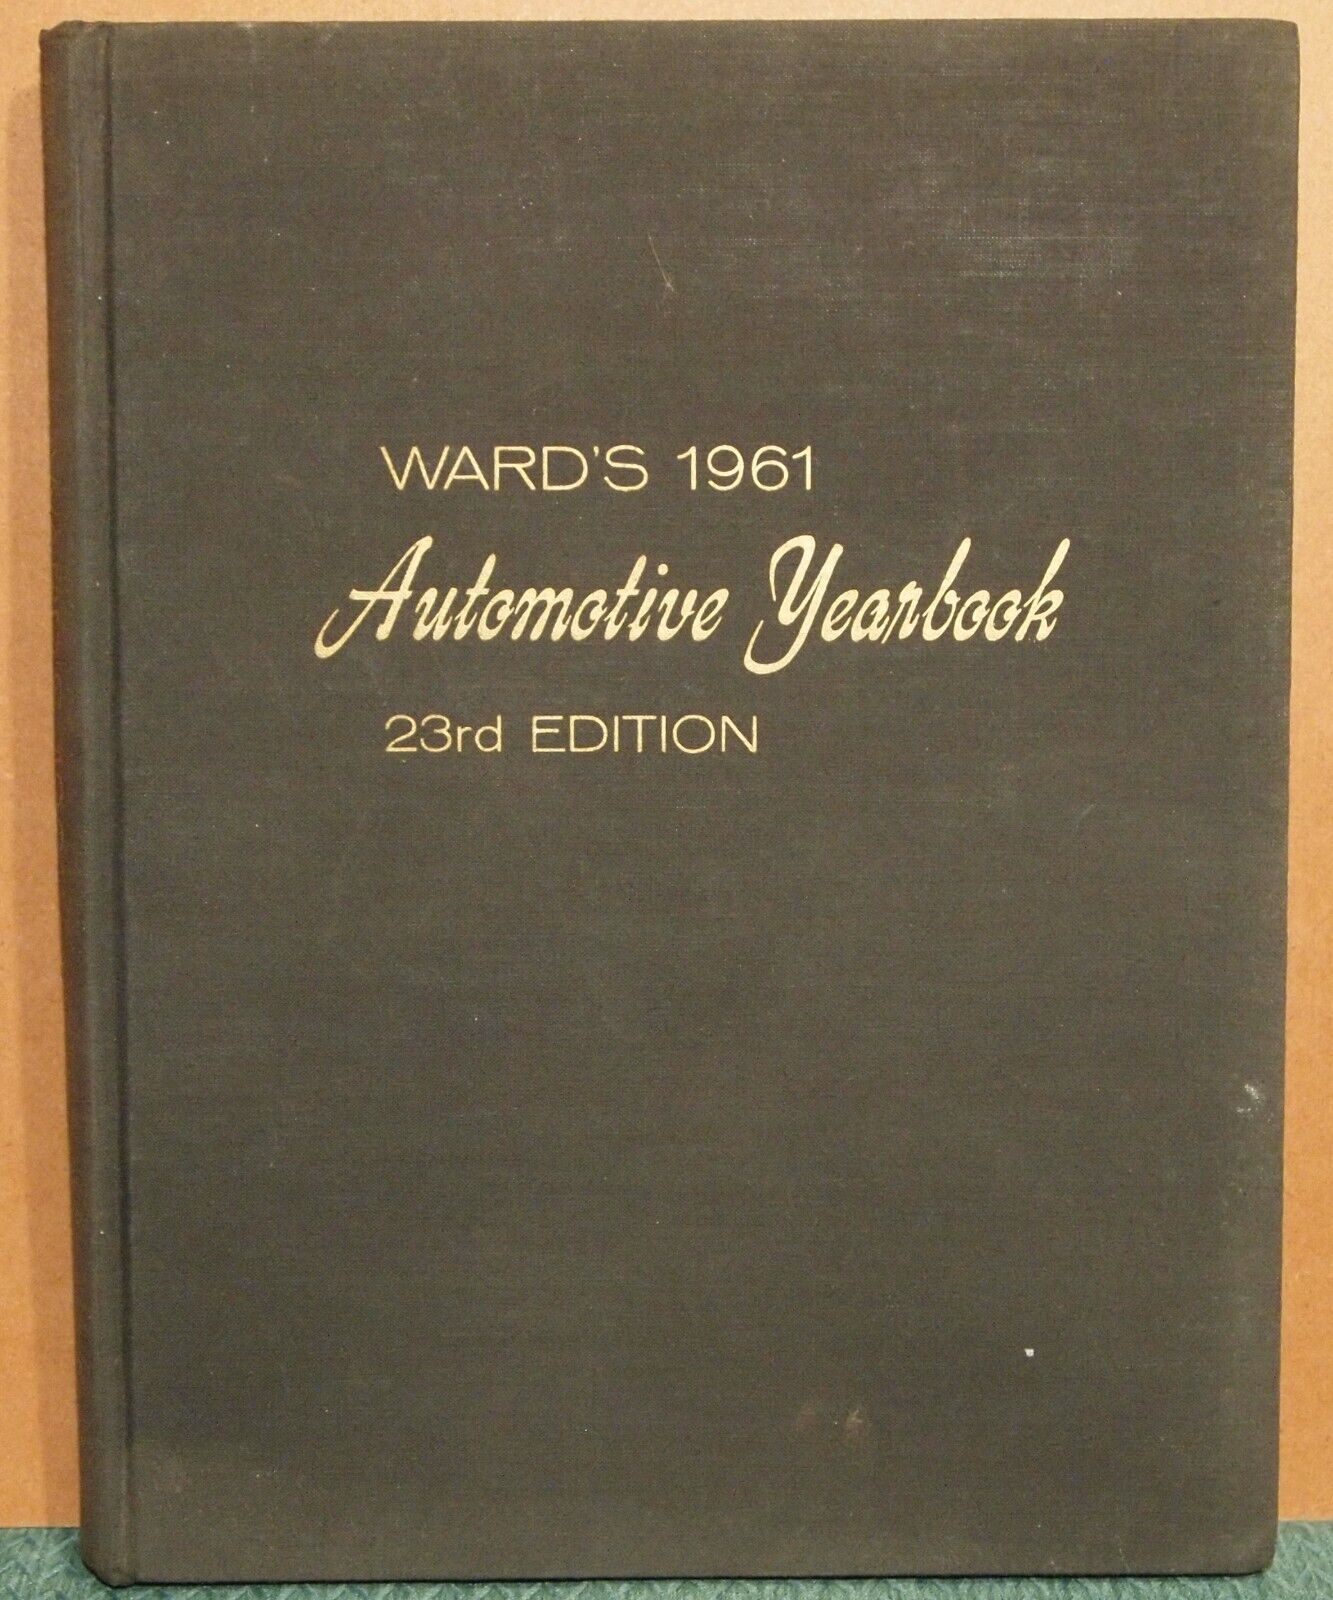 1961 WARD\'S AUTOMOTIVE YEARBOOK 23rd edition WARDS-51